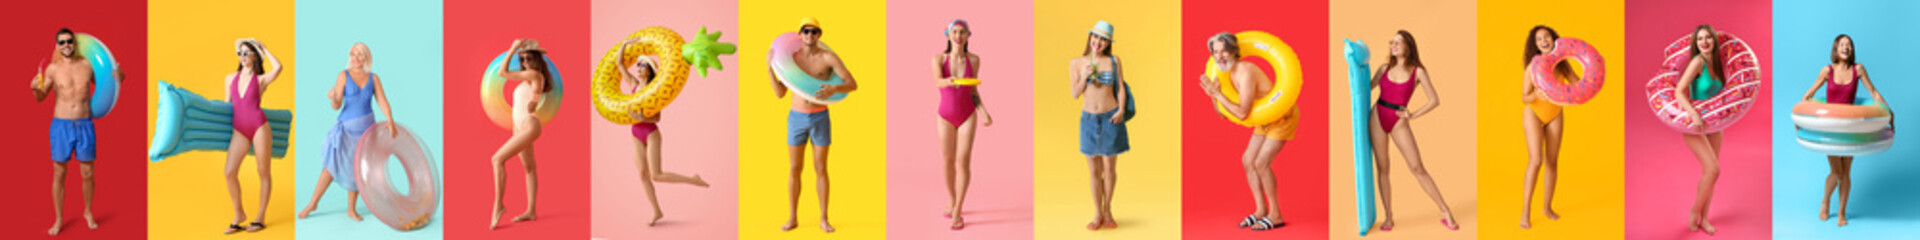 Set of different people in beachwear on colorful background